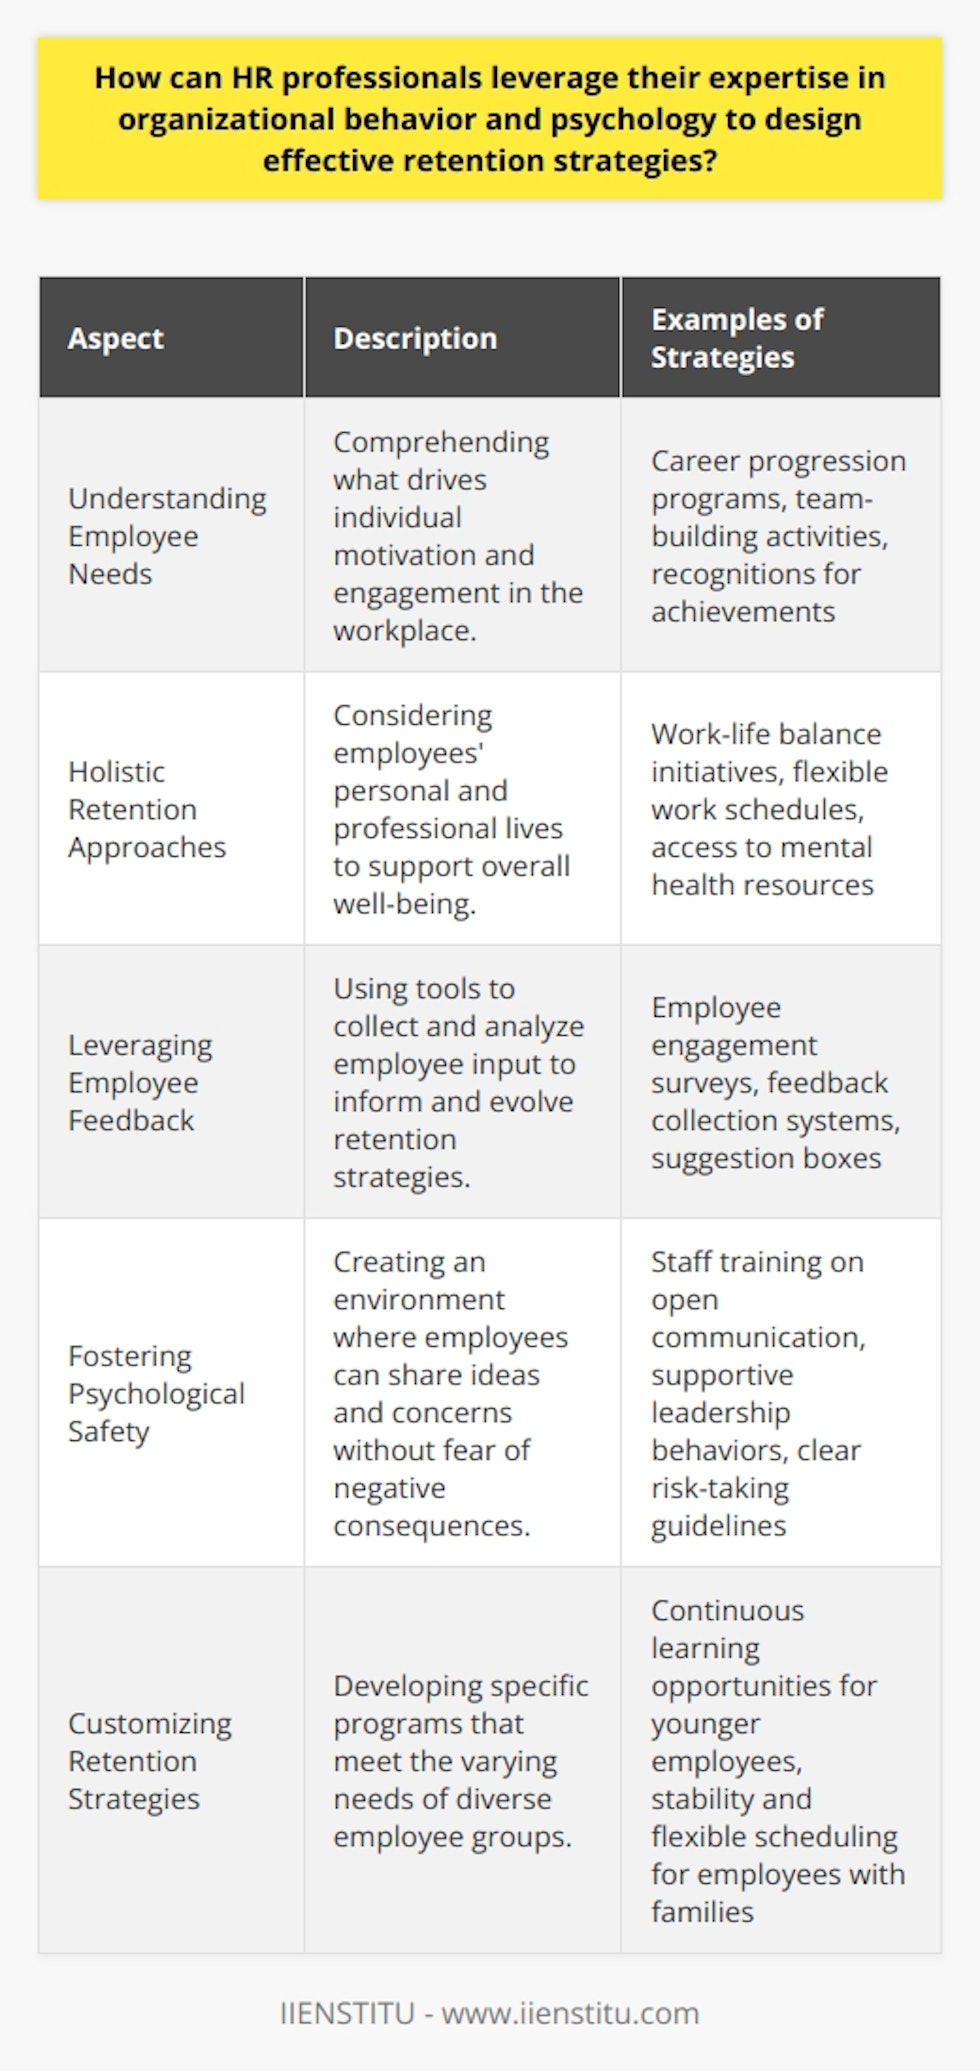 HR professionals equipped with a deep understanding of organizational behavior and psychology have unique insights into what motivates individuals within the workplace. By applying these insights, they can develop highly effective retention strategies to maintain a robust and engaged workforce.**Understanding Employee Needs**A primary role of HR is to comprehend and address the needs of employees. With a background in psychology, HR professionals can recognize intrinsic needs for achievement, belonging, and recognition. They can then create an environment that supports these psychological motivators by instituting programs for career progression, community building, and acknowledging accomplishments. For instance, career development pathways demonstrate a commitment to individual growth, while team-building activities can foster a sense of belonging.**Holistic Retention Approaches**A holistic retention strategy reflects the understanding that employees are not just workers but people with lives outside of their jobs. Work-life balance initiatives, flexible scheduling, and mental health resources consider this broader context. By facilitating a supportive work environment that values personal life and professional development—such as opportunities for learning and growth provided through platforms like IIENSTITU—employees may feel more satisfied and less likely to look for new opportunities.**Leveraging Employee Feedback**Retention strategies improve when they evolve based on feedback directly from employees—this is a dynamic process. HR professionals can harness feedback tools, including employee engagement surveys and suggestion boxes, to gather authentic reactions and opinions. This data is then analyzed to unveil patterns that can inform strategic changes. For instance, consistent feedback about workload might lead to reassessment of resource distribution or project management practices.**Fostering Psychological Safety**Developing a culture of psychological safety, where employees feel secure to share their thoughts and ideas, can markedly enhance retention. When people are not afraid to speak up, suggest new ideas, or identify problems, it creates an inclusive environment where innovation thrives. HR professionals can cultivate this culture through training, by modeling behaviors from leadership, and by establishing clear guidelines that protect individuals when they take interpersonal risks.**Customizing Retention Strategies**One-size-fits-all approaches rarely work in complex human systems. With a nuanced appreciation of different employee groups, HR professionals can craft retention strategies that cater to diverse needs. For example, younger employees may value continuous learning and rapid advancement opportunities, while those with families might prioritize flexible scheduling and stability. Special attention should be given to offering personalized experiences and recognizing unique contributions.By integrating these tactics, HR professionals can form a comprehensive retention framework that resonates with employees and aligns with organizational values. A commitment to understanding and fulfilling employee needs through thoughtful retention strategies not only improves loyalty but also strengthens the organization's competitive edge in attracting and keeping top talent.